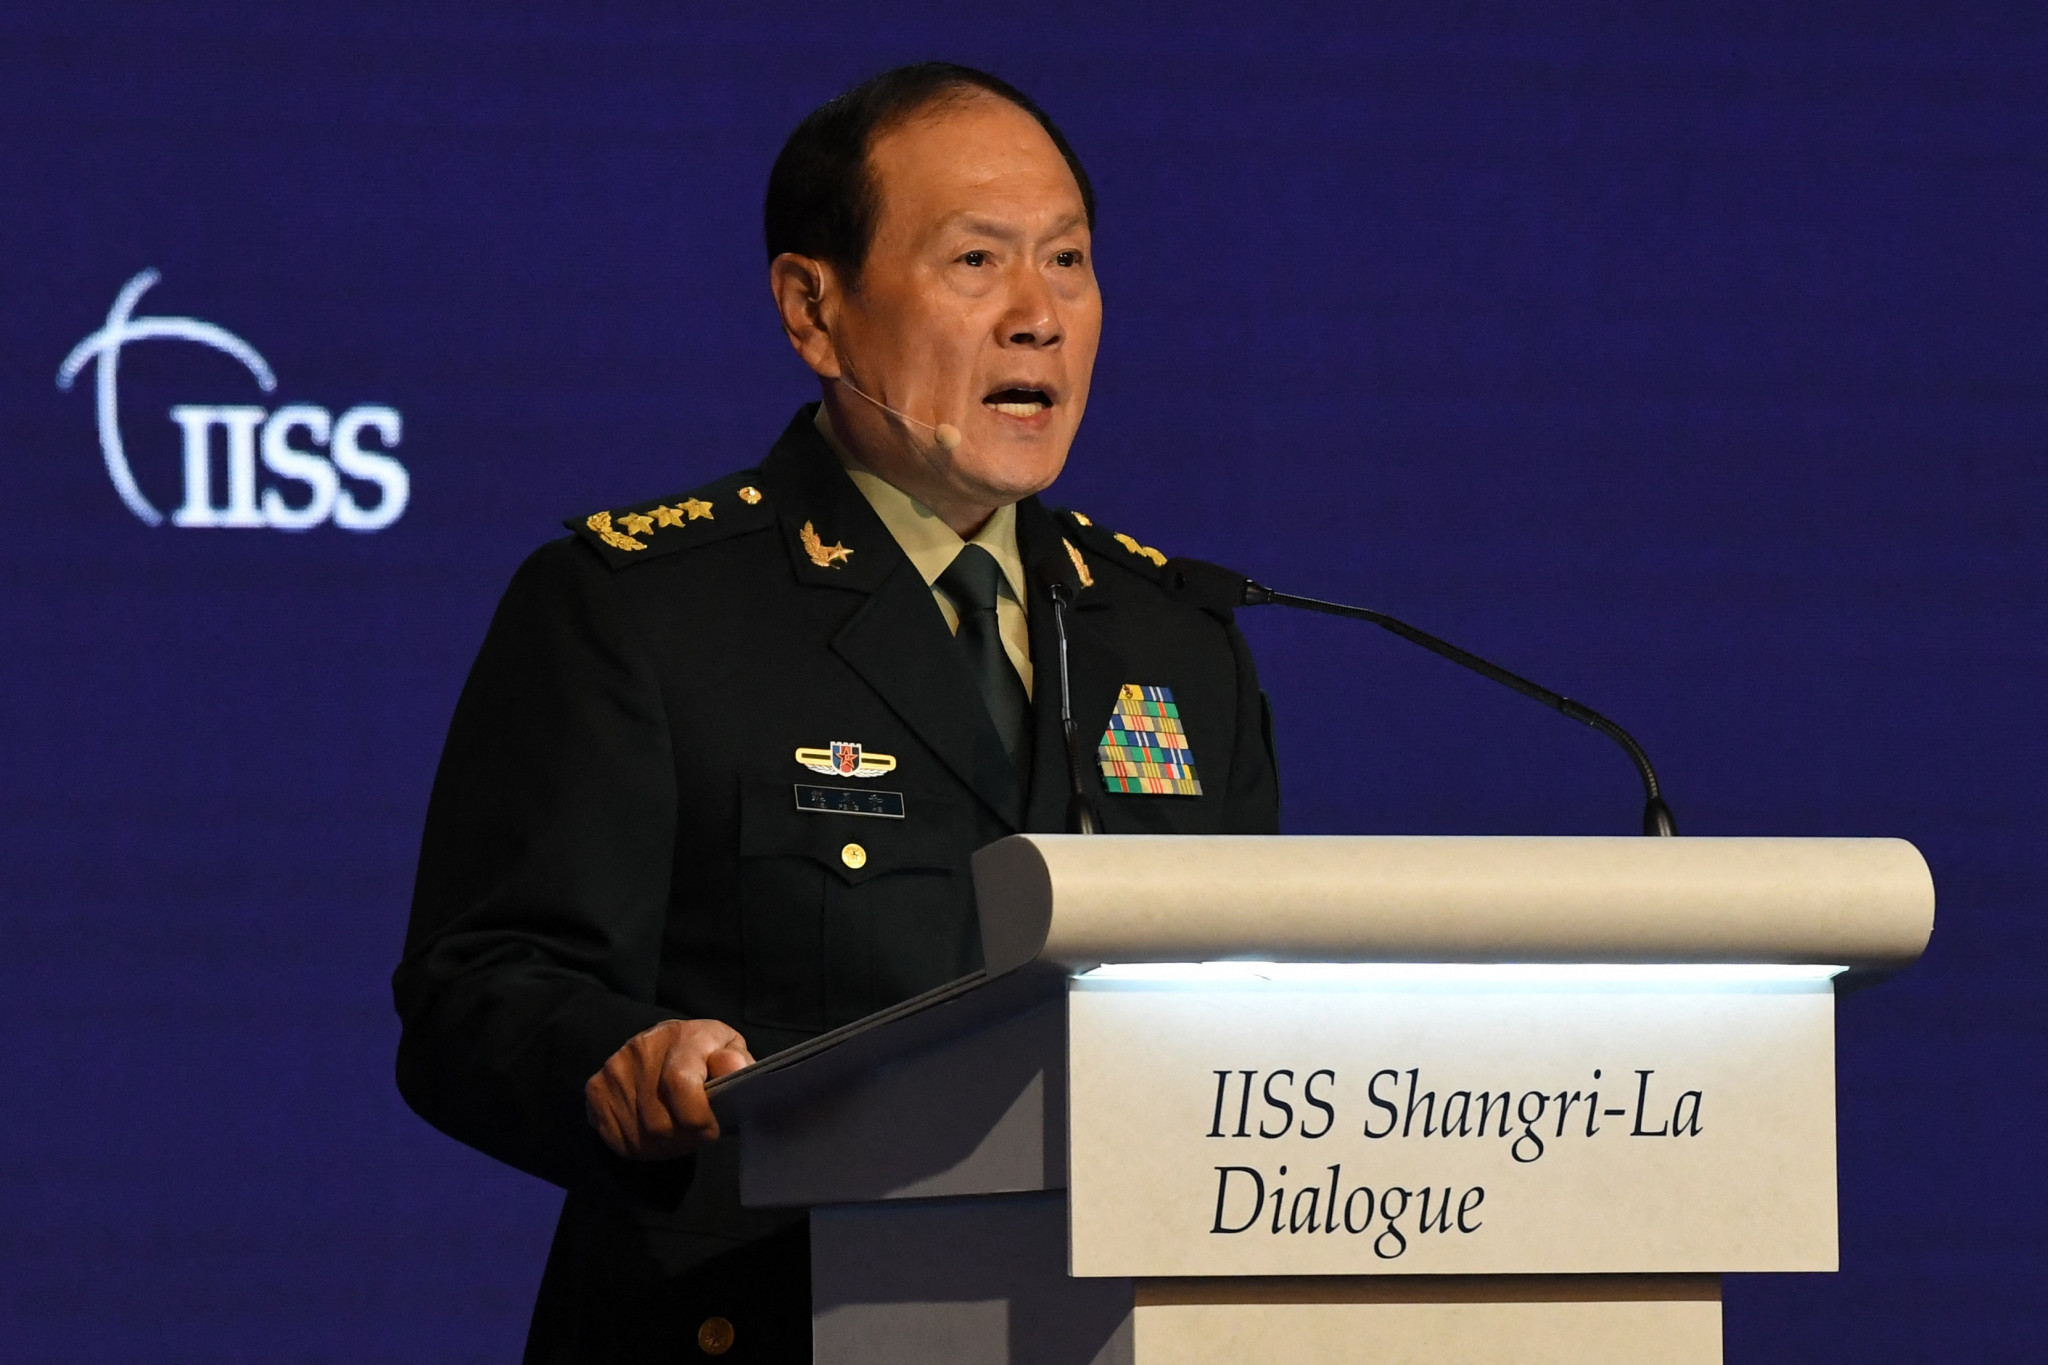 Chinese Defence Minister Wei Fenghe said he felt sanctions against Russia only increased tensions between nations when speaking at the Shangri-La Dialogue summit in Singapore ©Getty Images